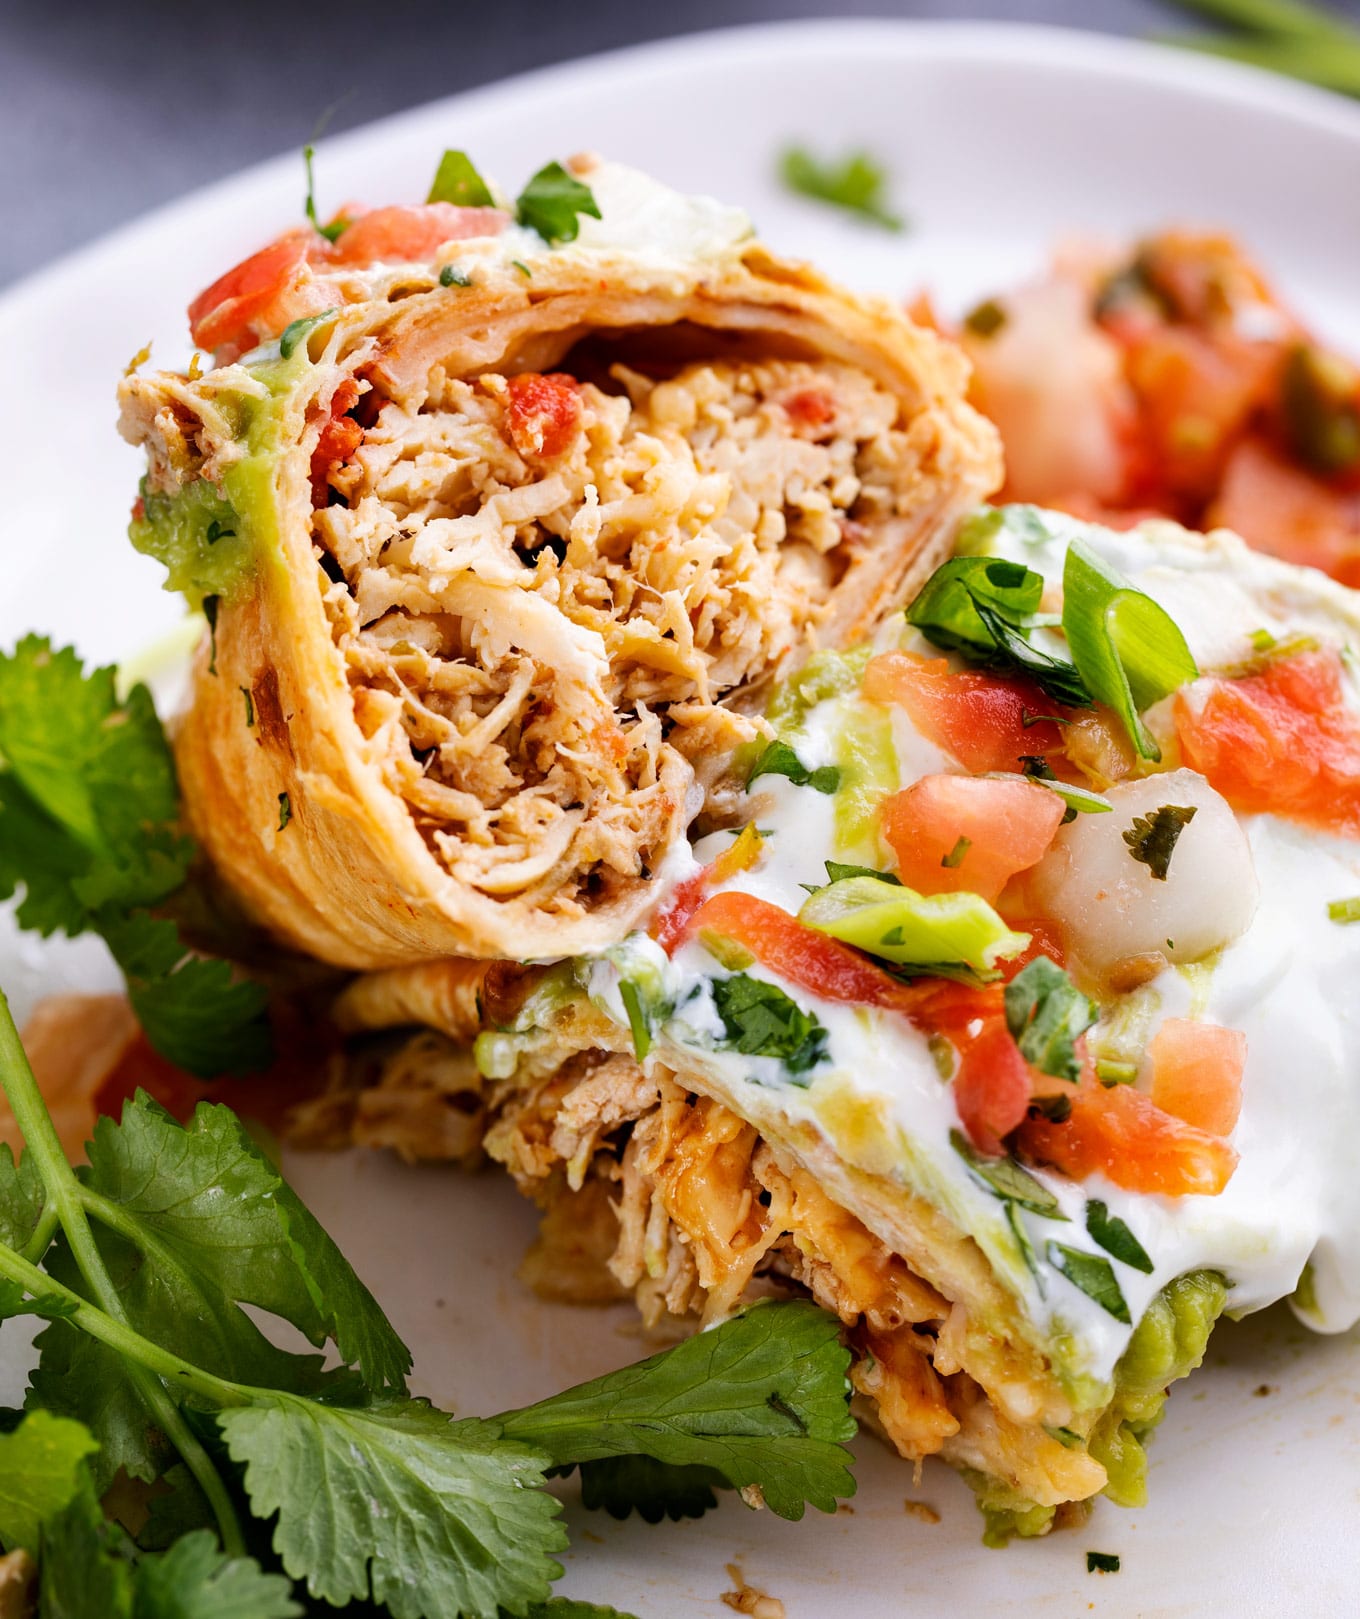 Baked Chicken Chimichangas - Mexican Recipes - Old El Paso